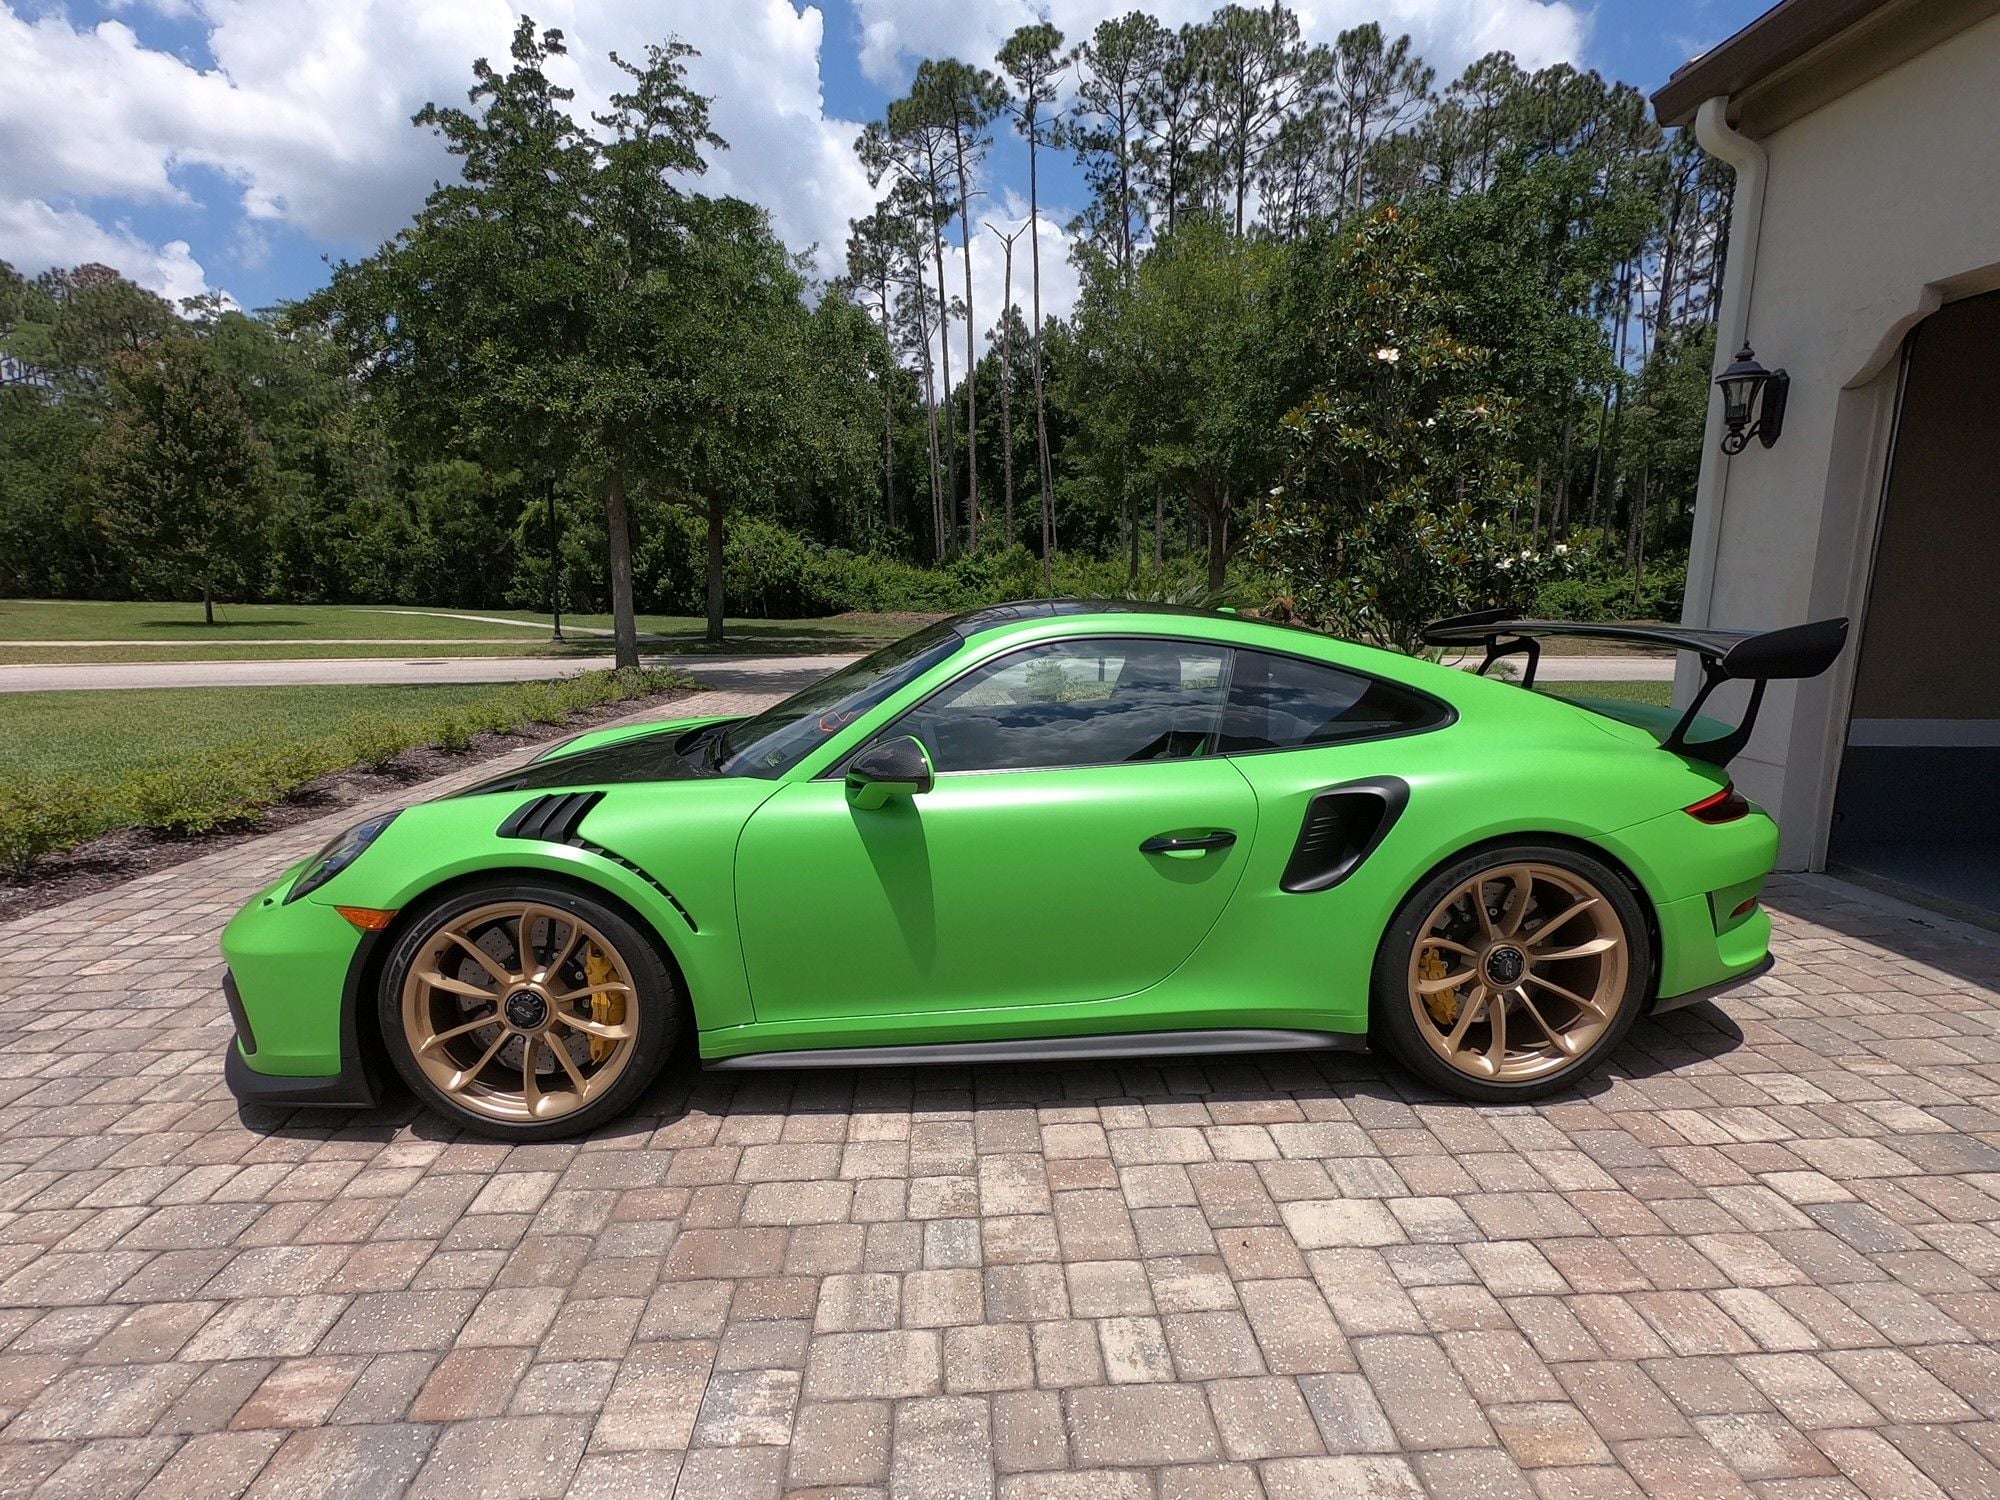 2019 Porsche GT3 - 2019 GT3 RS-Weissach,PCCB,Nose Lift--Priced $15k Under MSRP - Used - VIN WP0AF2A96KS164999 - 2,789 Miles - 6 cyl - 2WD - Automatic - Coupe - Other - Ponte Vedra Beach, FL 32082, United States